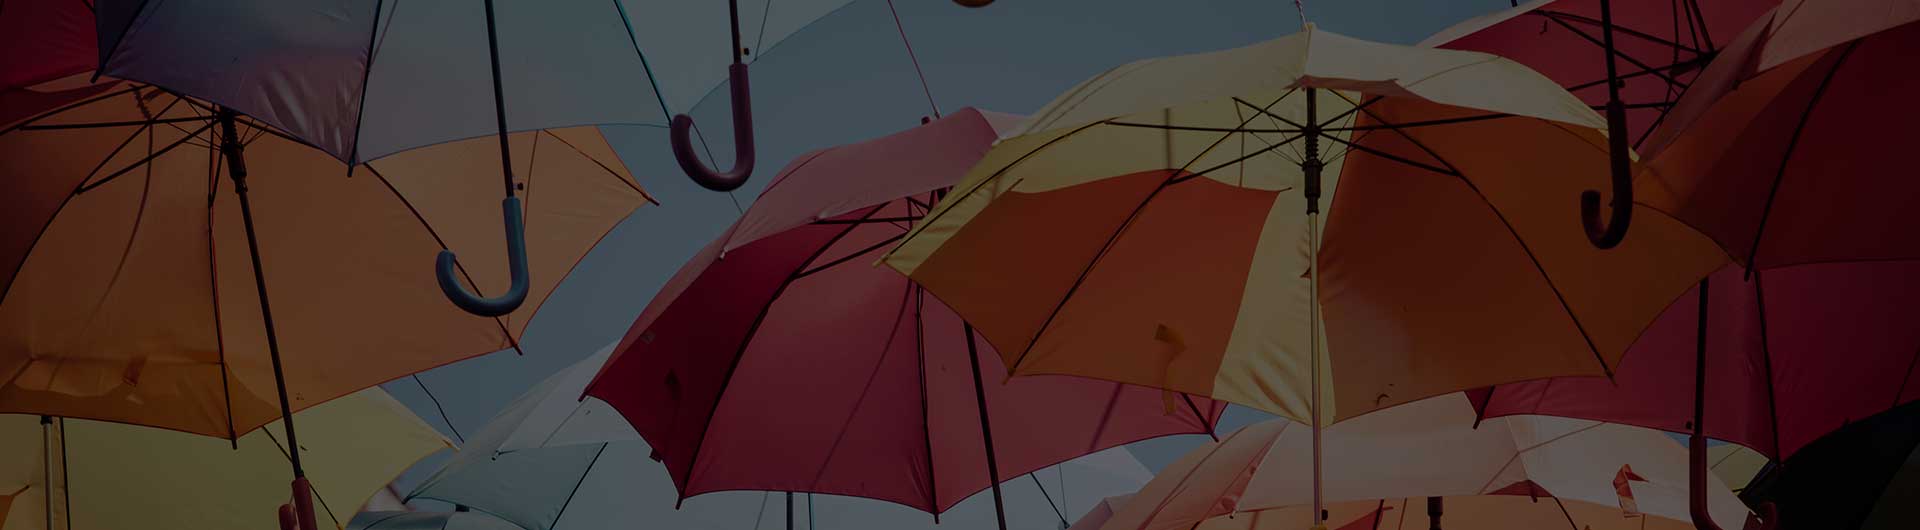 A background of colorful umbrellas.